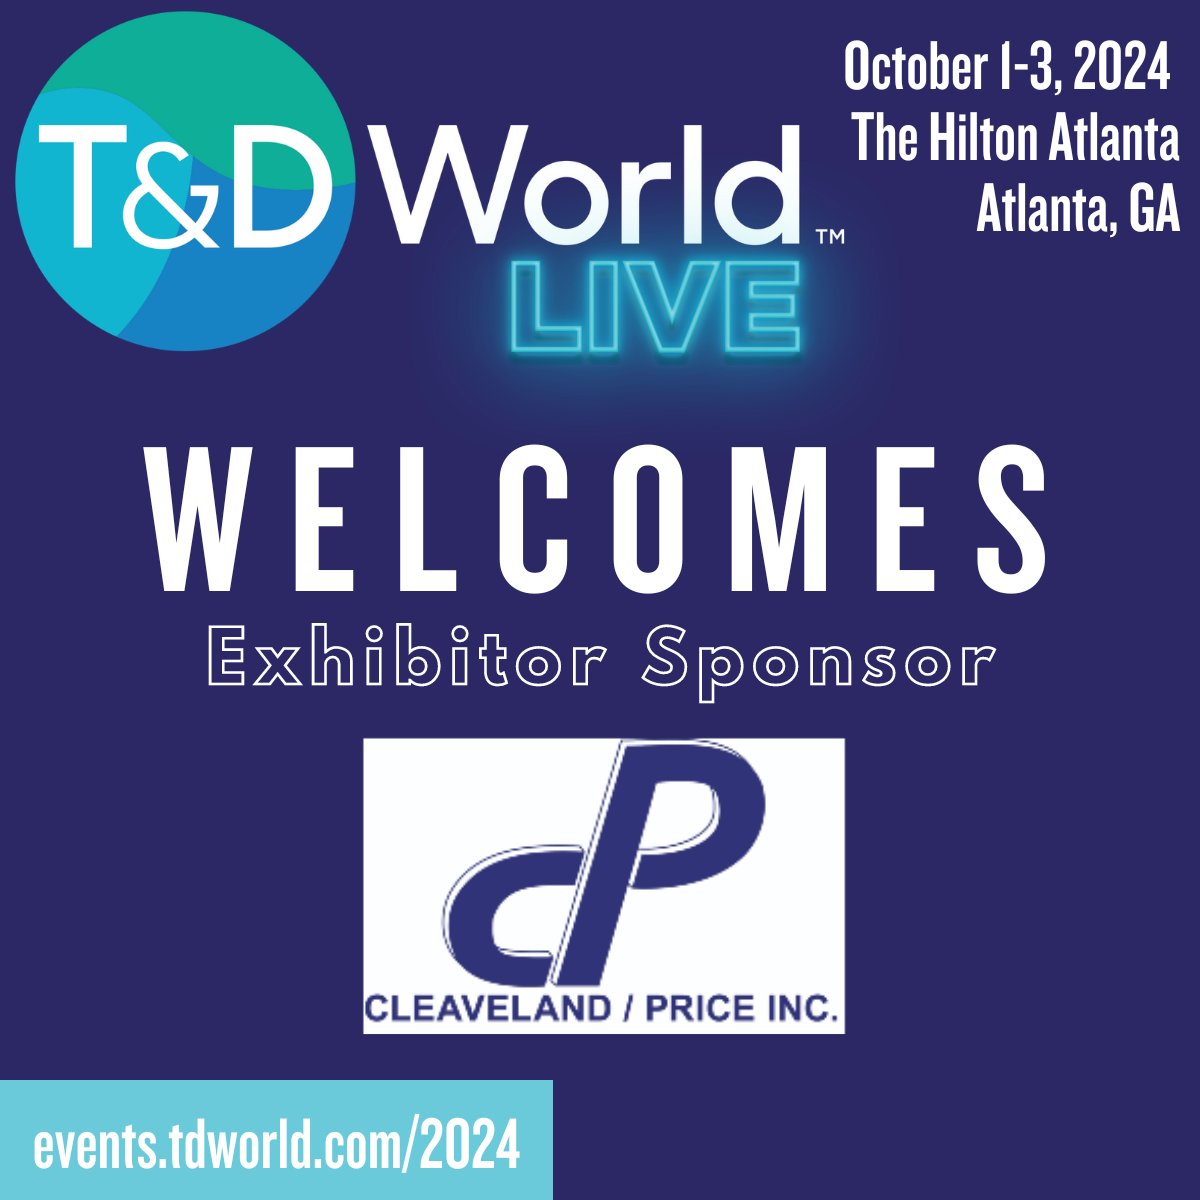 T&D World Live 2024 welcomes exhibitor sponsor: Cleaveland / Price Inc. We thank our sponsors for their contribution to the T&D World Live conference taking place October 1-3, 2024! Ensure maximum brand visibility by reserving your exhibitor booth and sponsorship in advance!